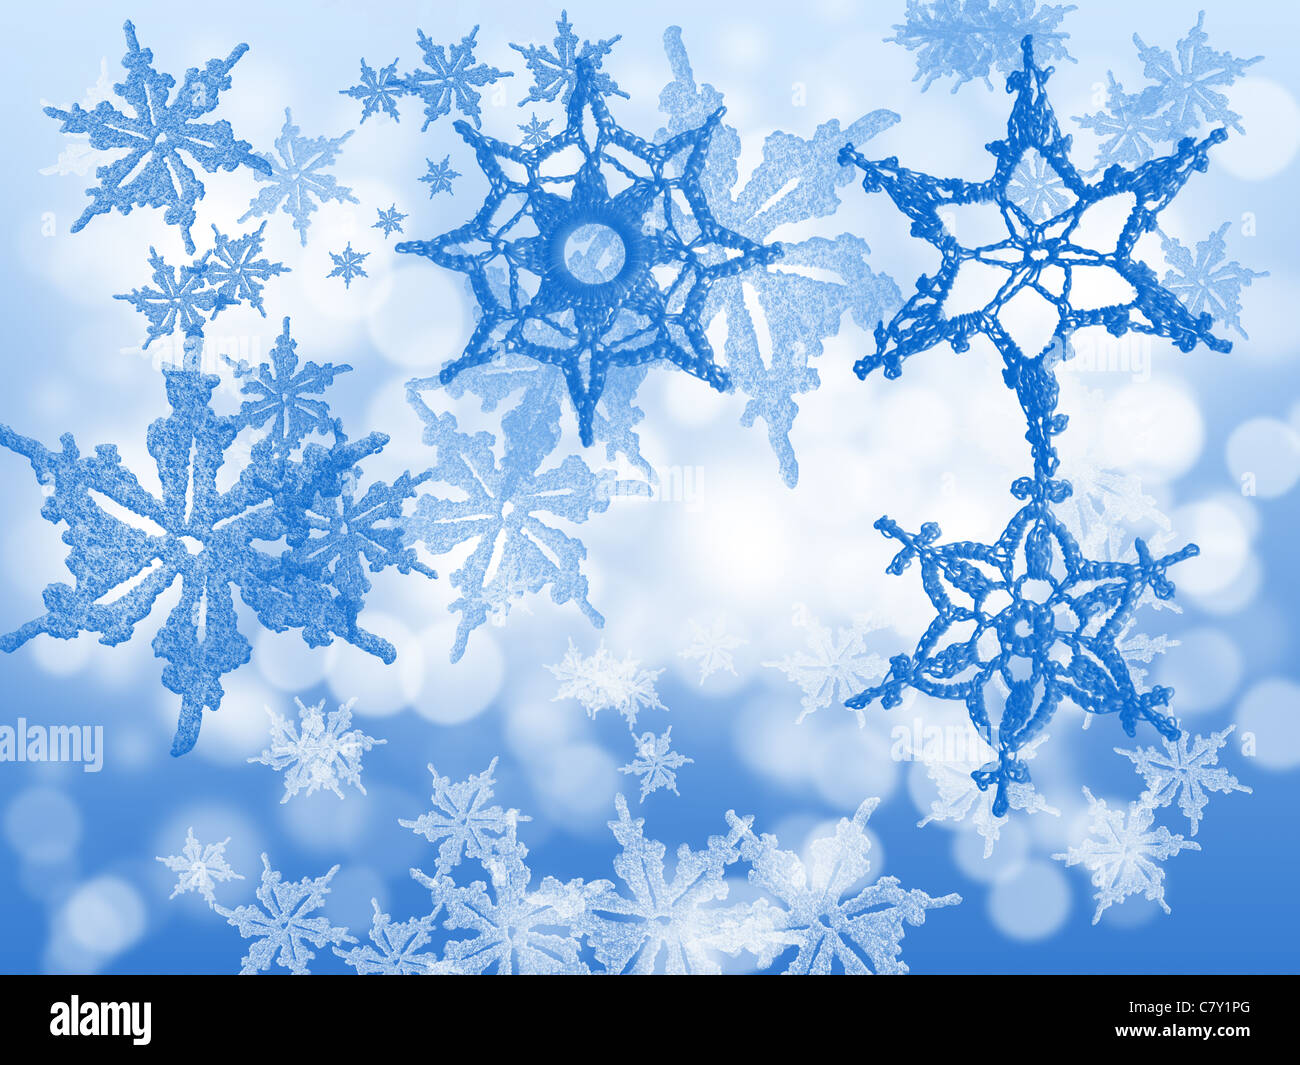 Abstract blue sparkling snowflakes background Stock Photo